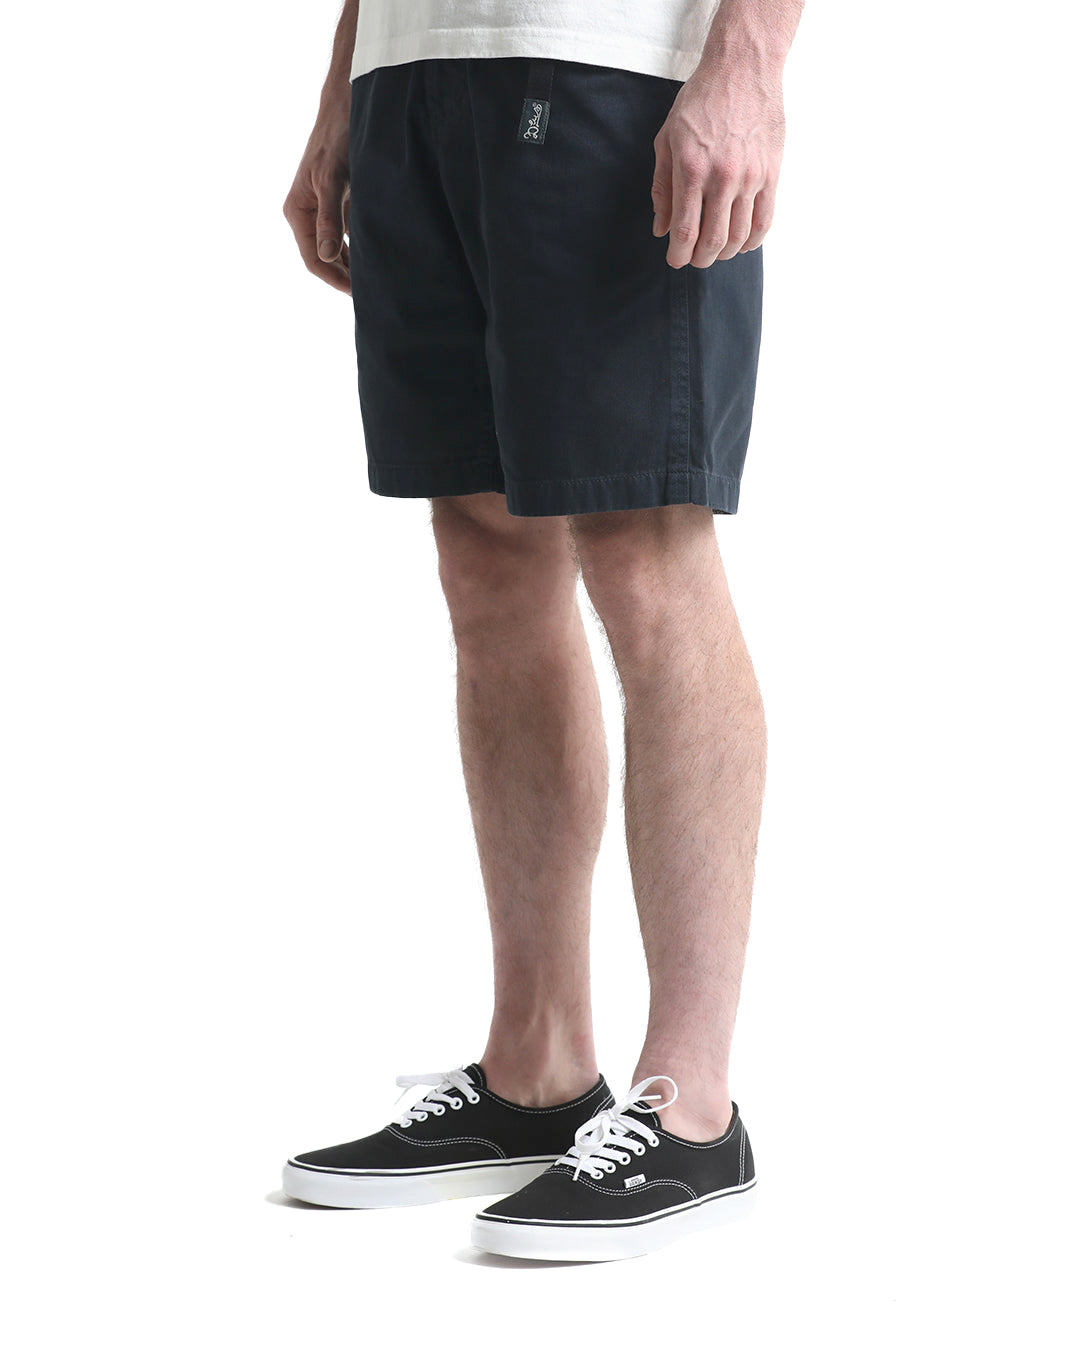 St-Shorts (Relaxed Fit) - Double Navy|Model